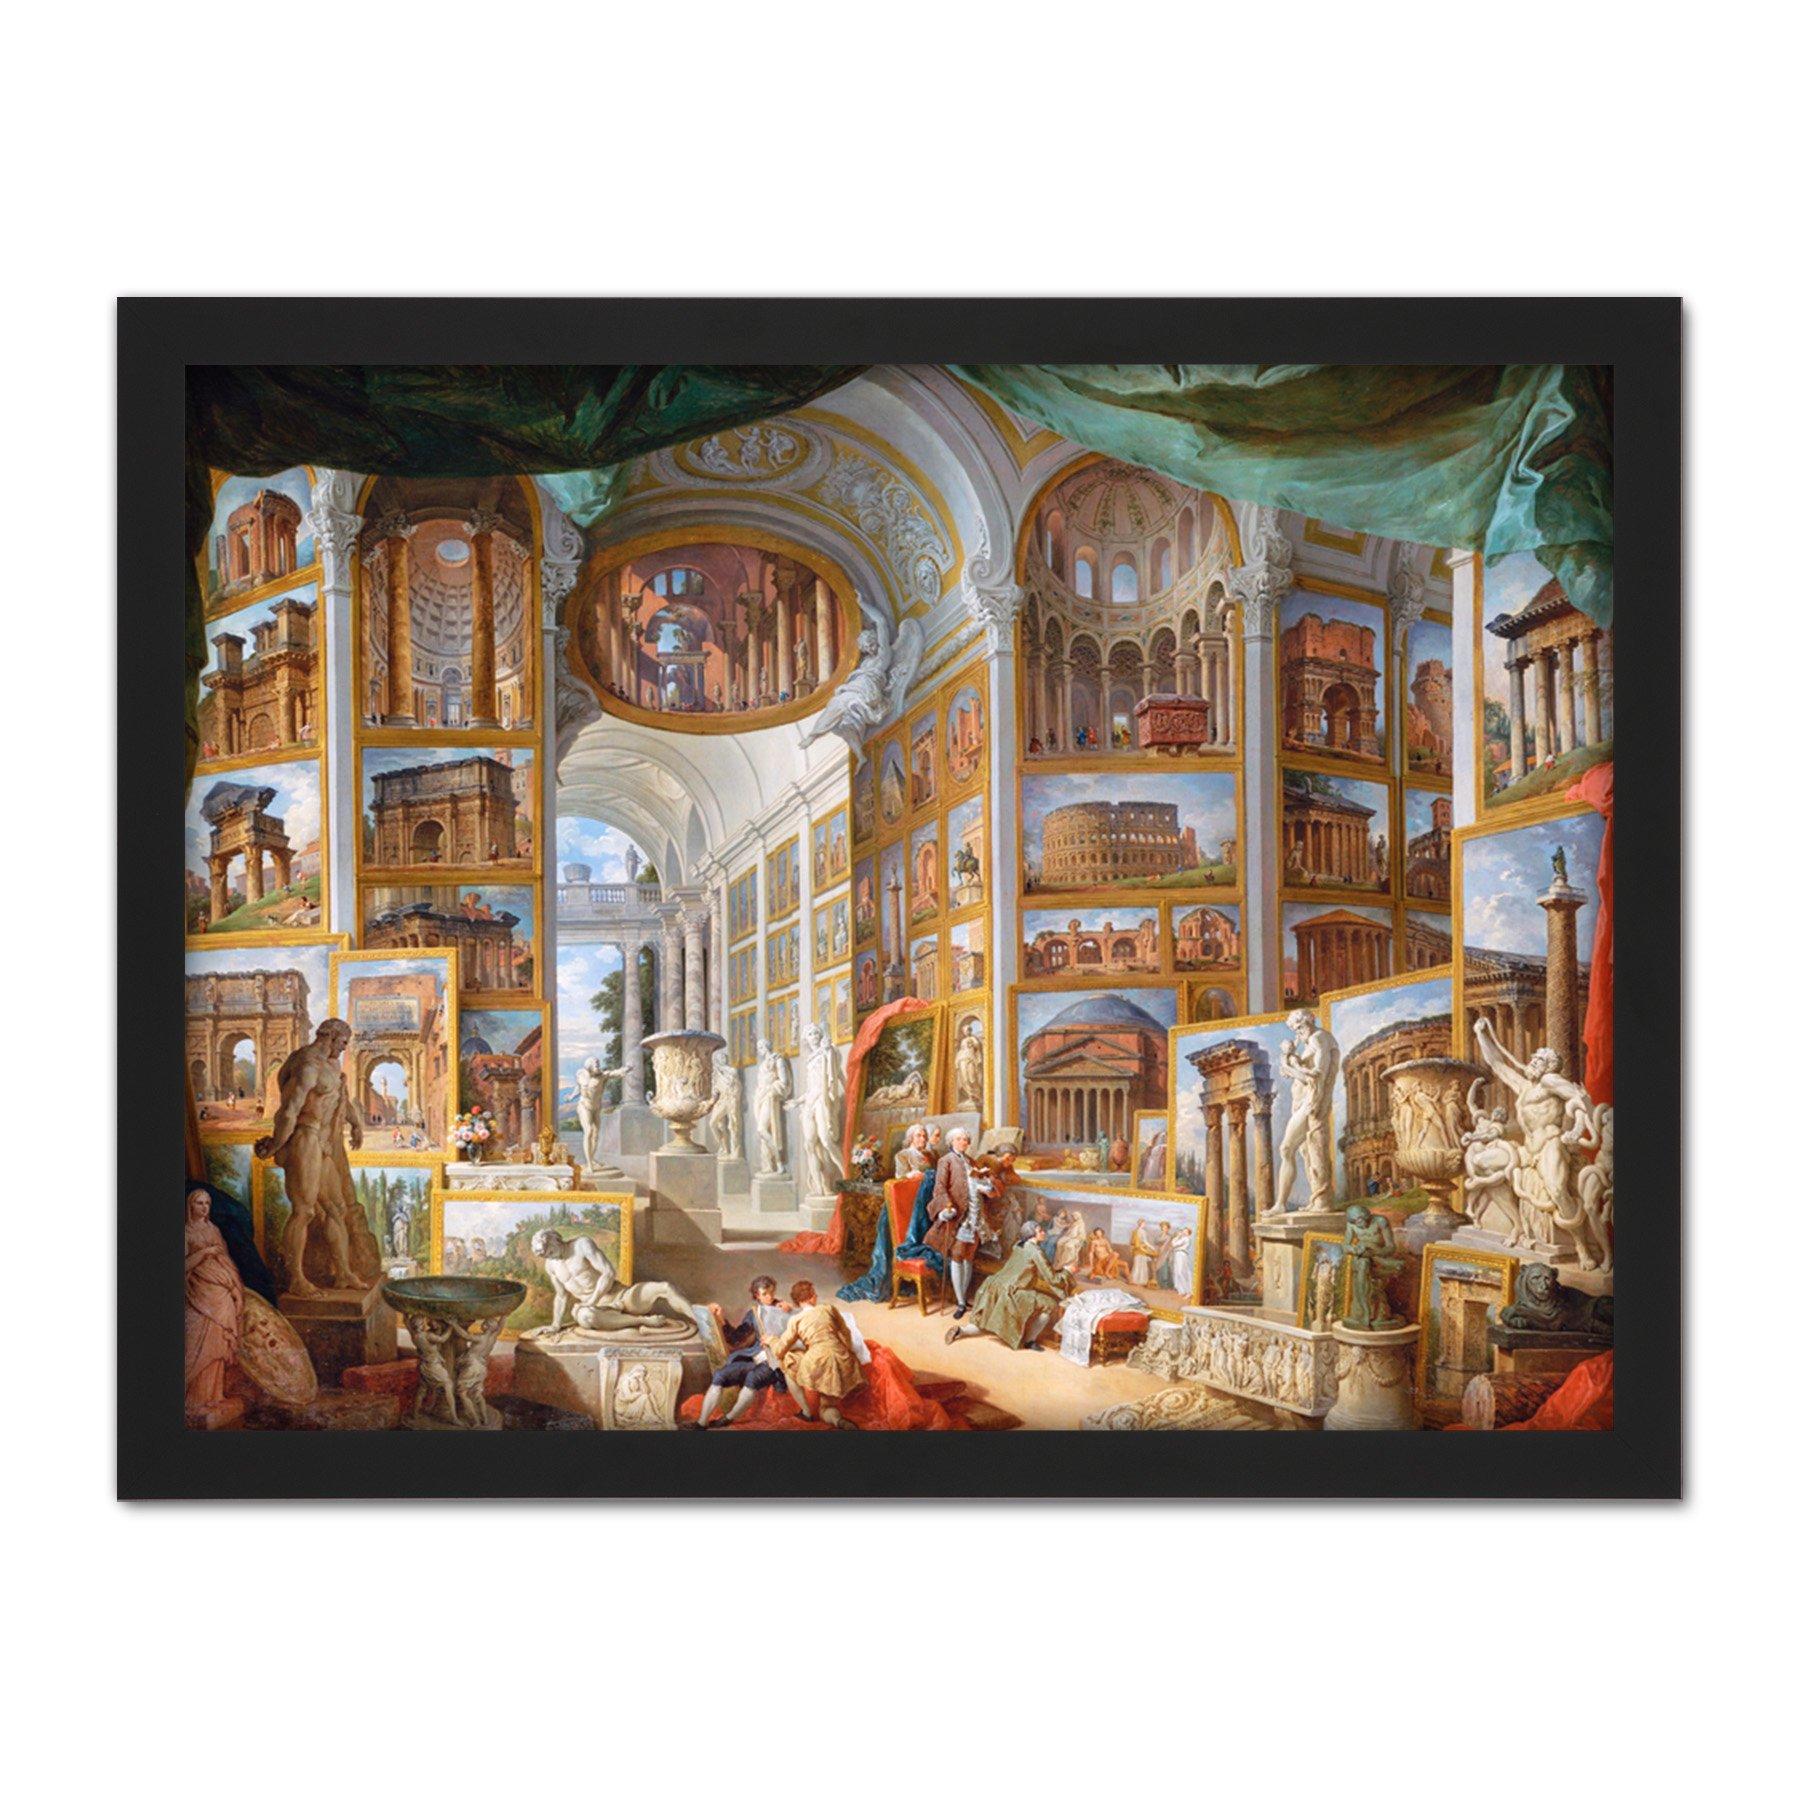 Panini Ancient Rome Monuments Allegory Painting Large Framed Wall Decor Art Print